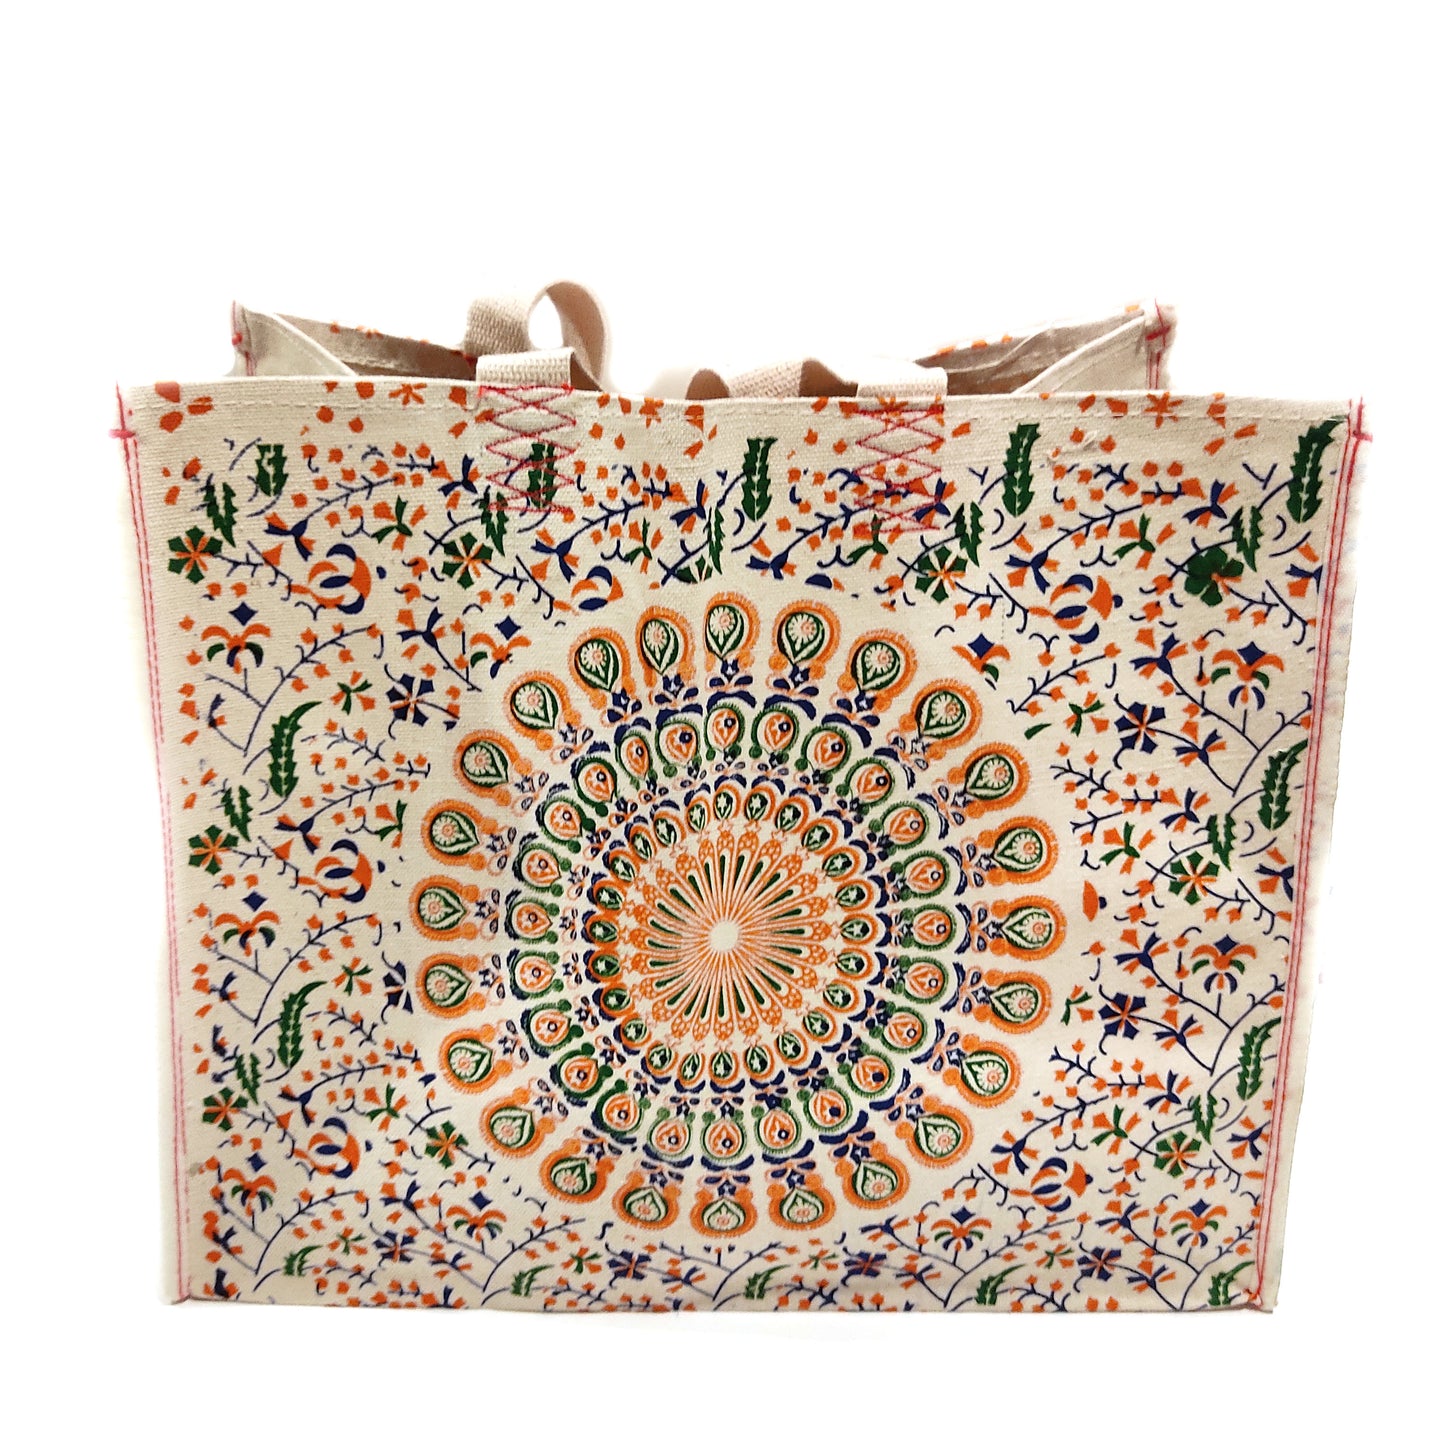 Heavy Weight Cream Color Canvas Tose Bag With Colorful Peacock Design 16"X19"